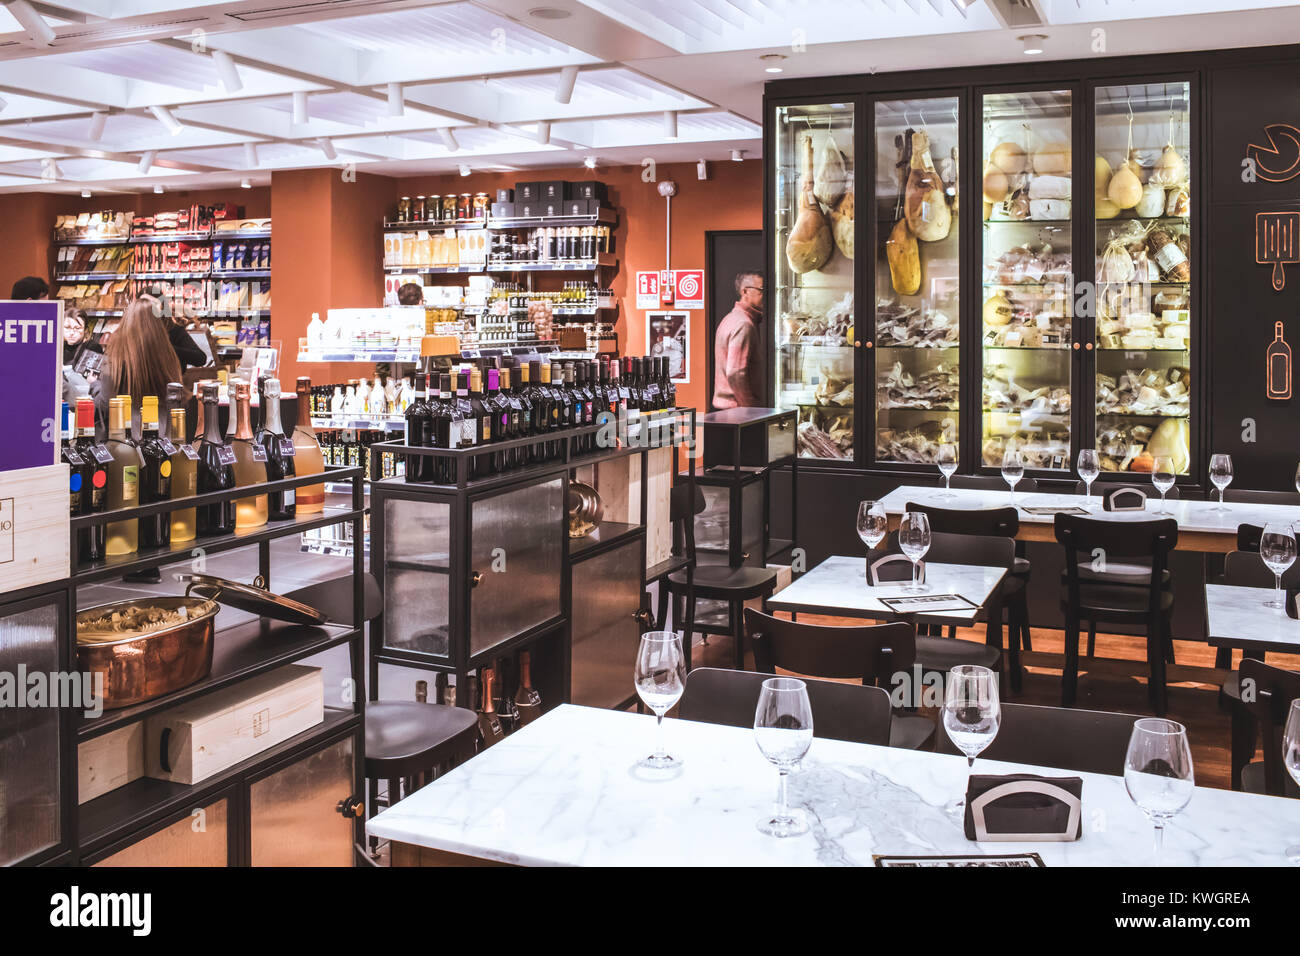 ROME, ITALY - DECEMBER 30, 2017: San Gregorio restaurant on the sixth floor of the new La Rinascente shopping mall in Rome, nice place for taste itali Stock Photo